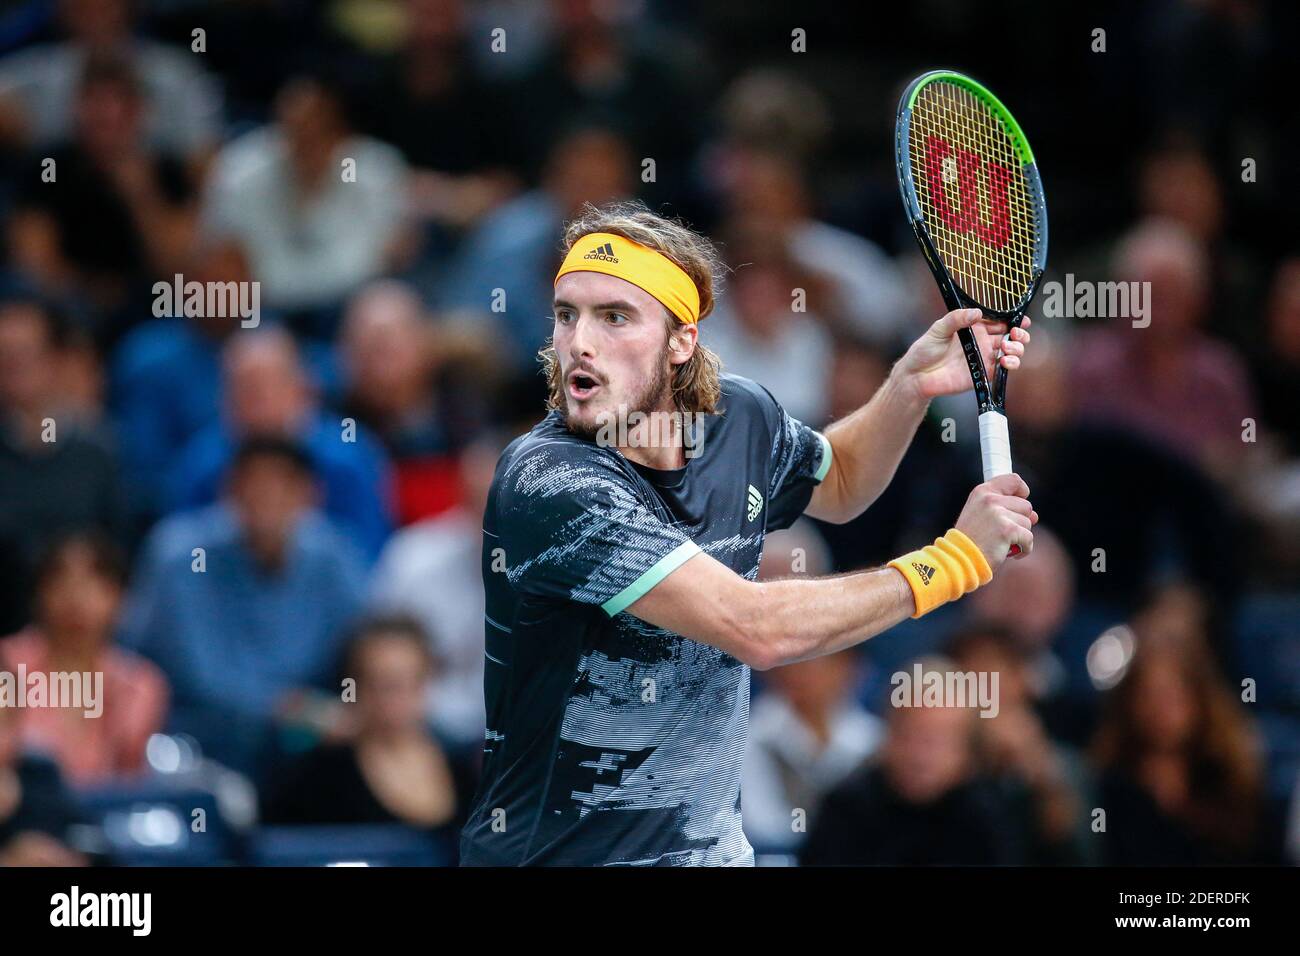 Stefanos Tsitsipas of Greece in action against Novak Djokovic (not seen) of  Serbia during the Rolex Paris Masters tennis tournament at AccorHotels  Arena in Paris, France on November 01, 2019. Photo by